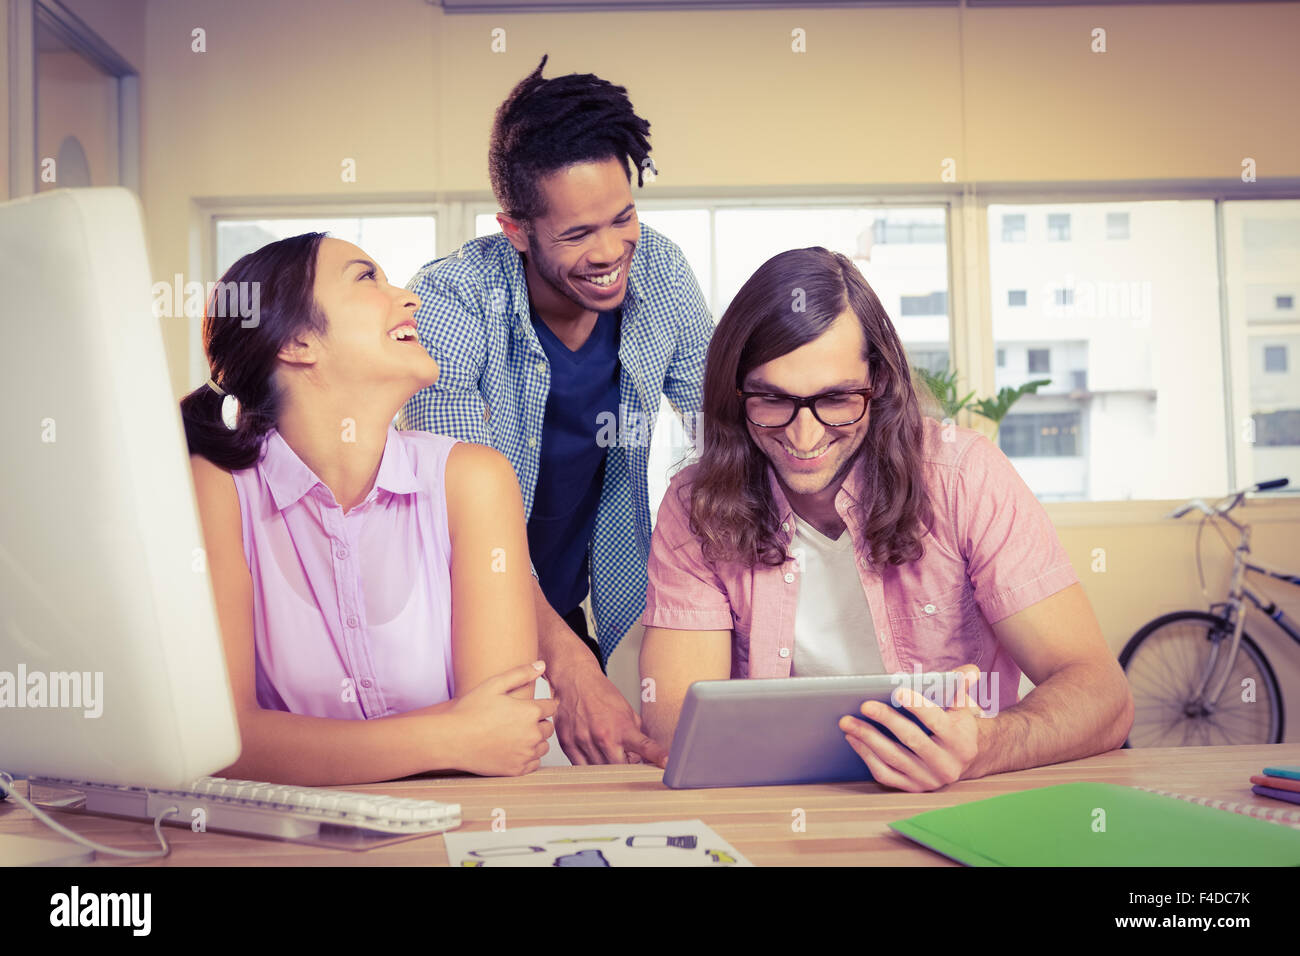 Business people smiling and discussing over digital tablet Stock Photo